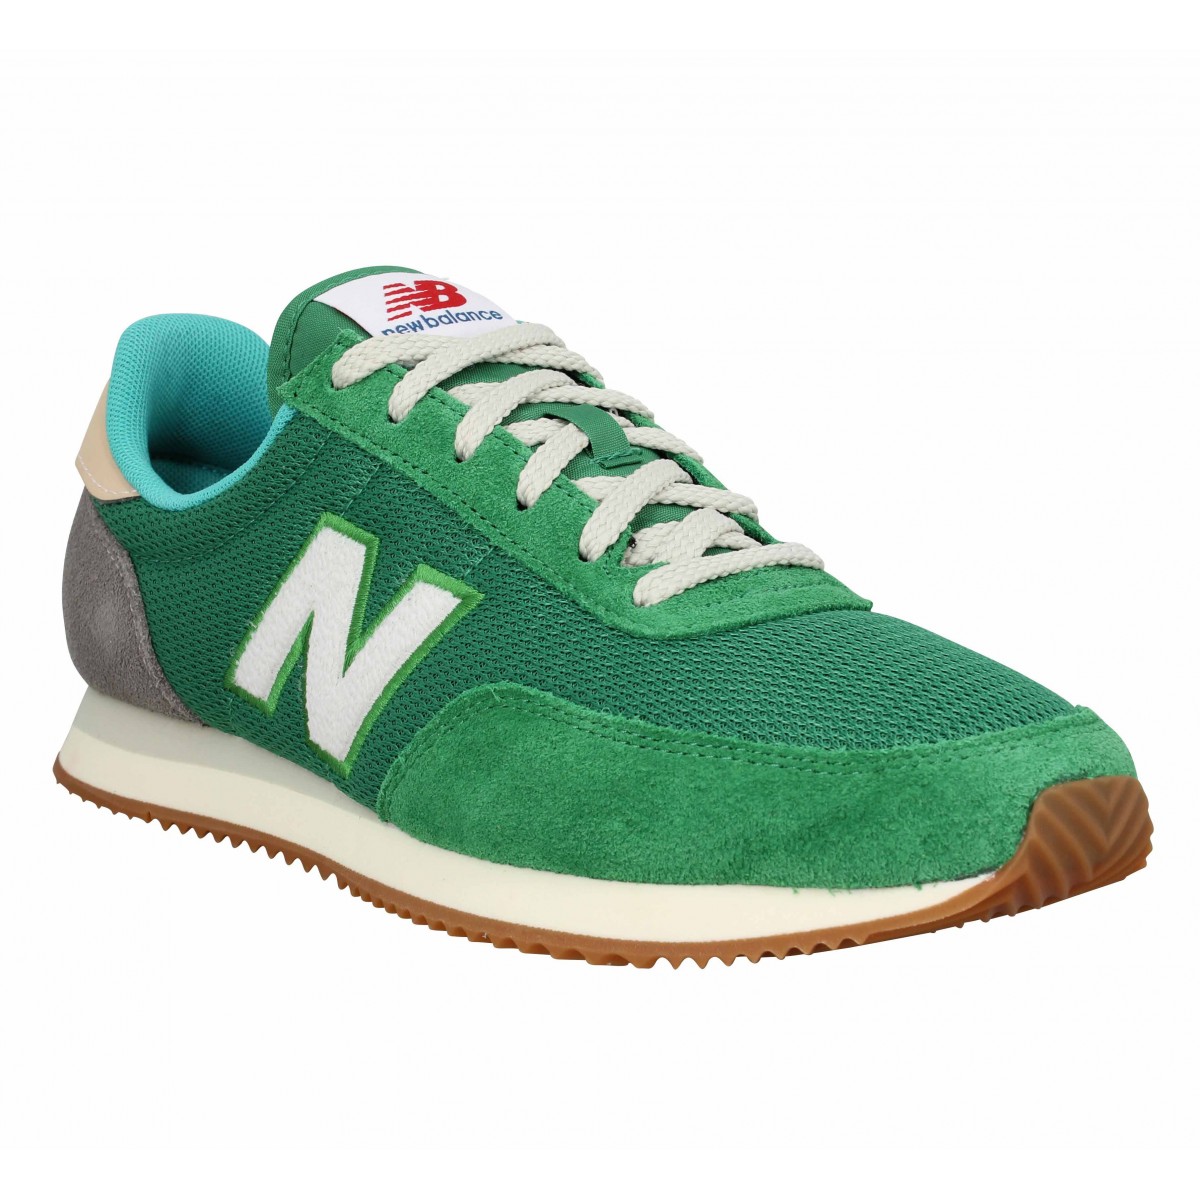 Chaussures New balance 720 yb velours toile homme vert homme ...